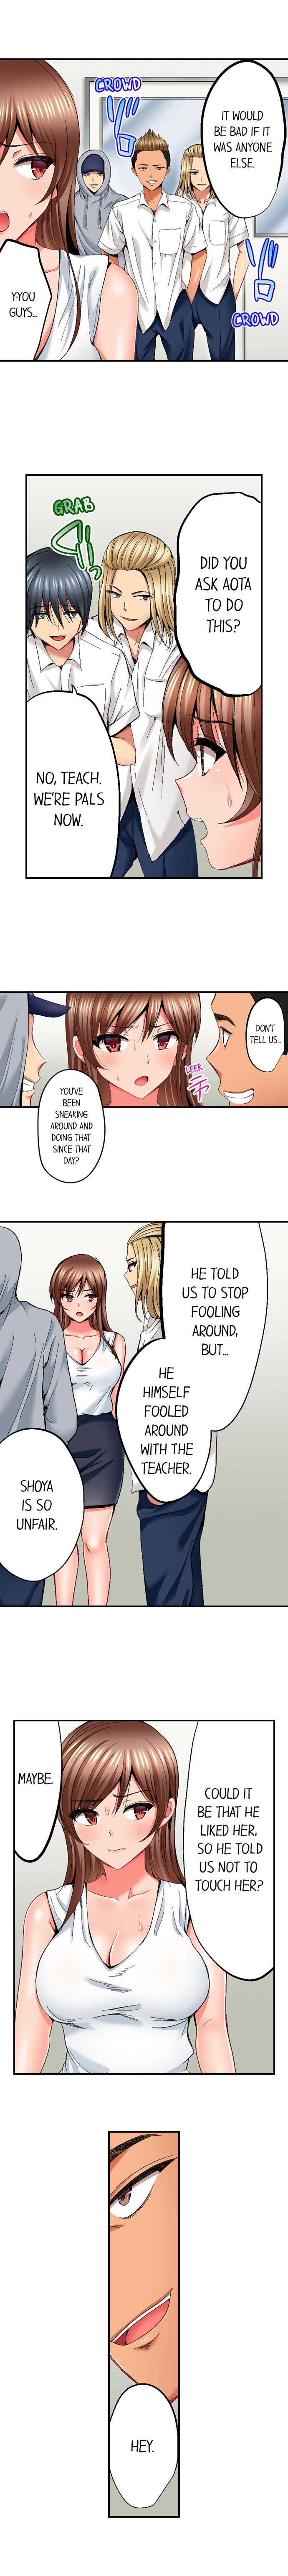 Netorare My Teacher With My Friends - Chapter 16 Page 7